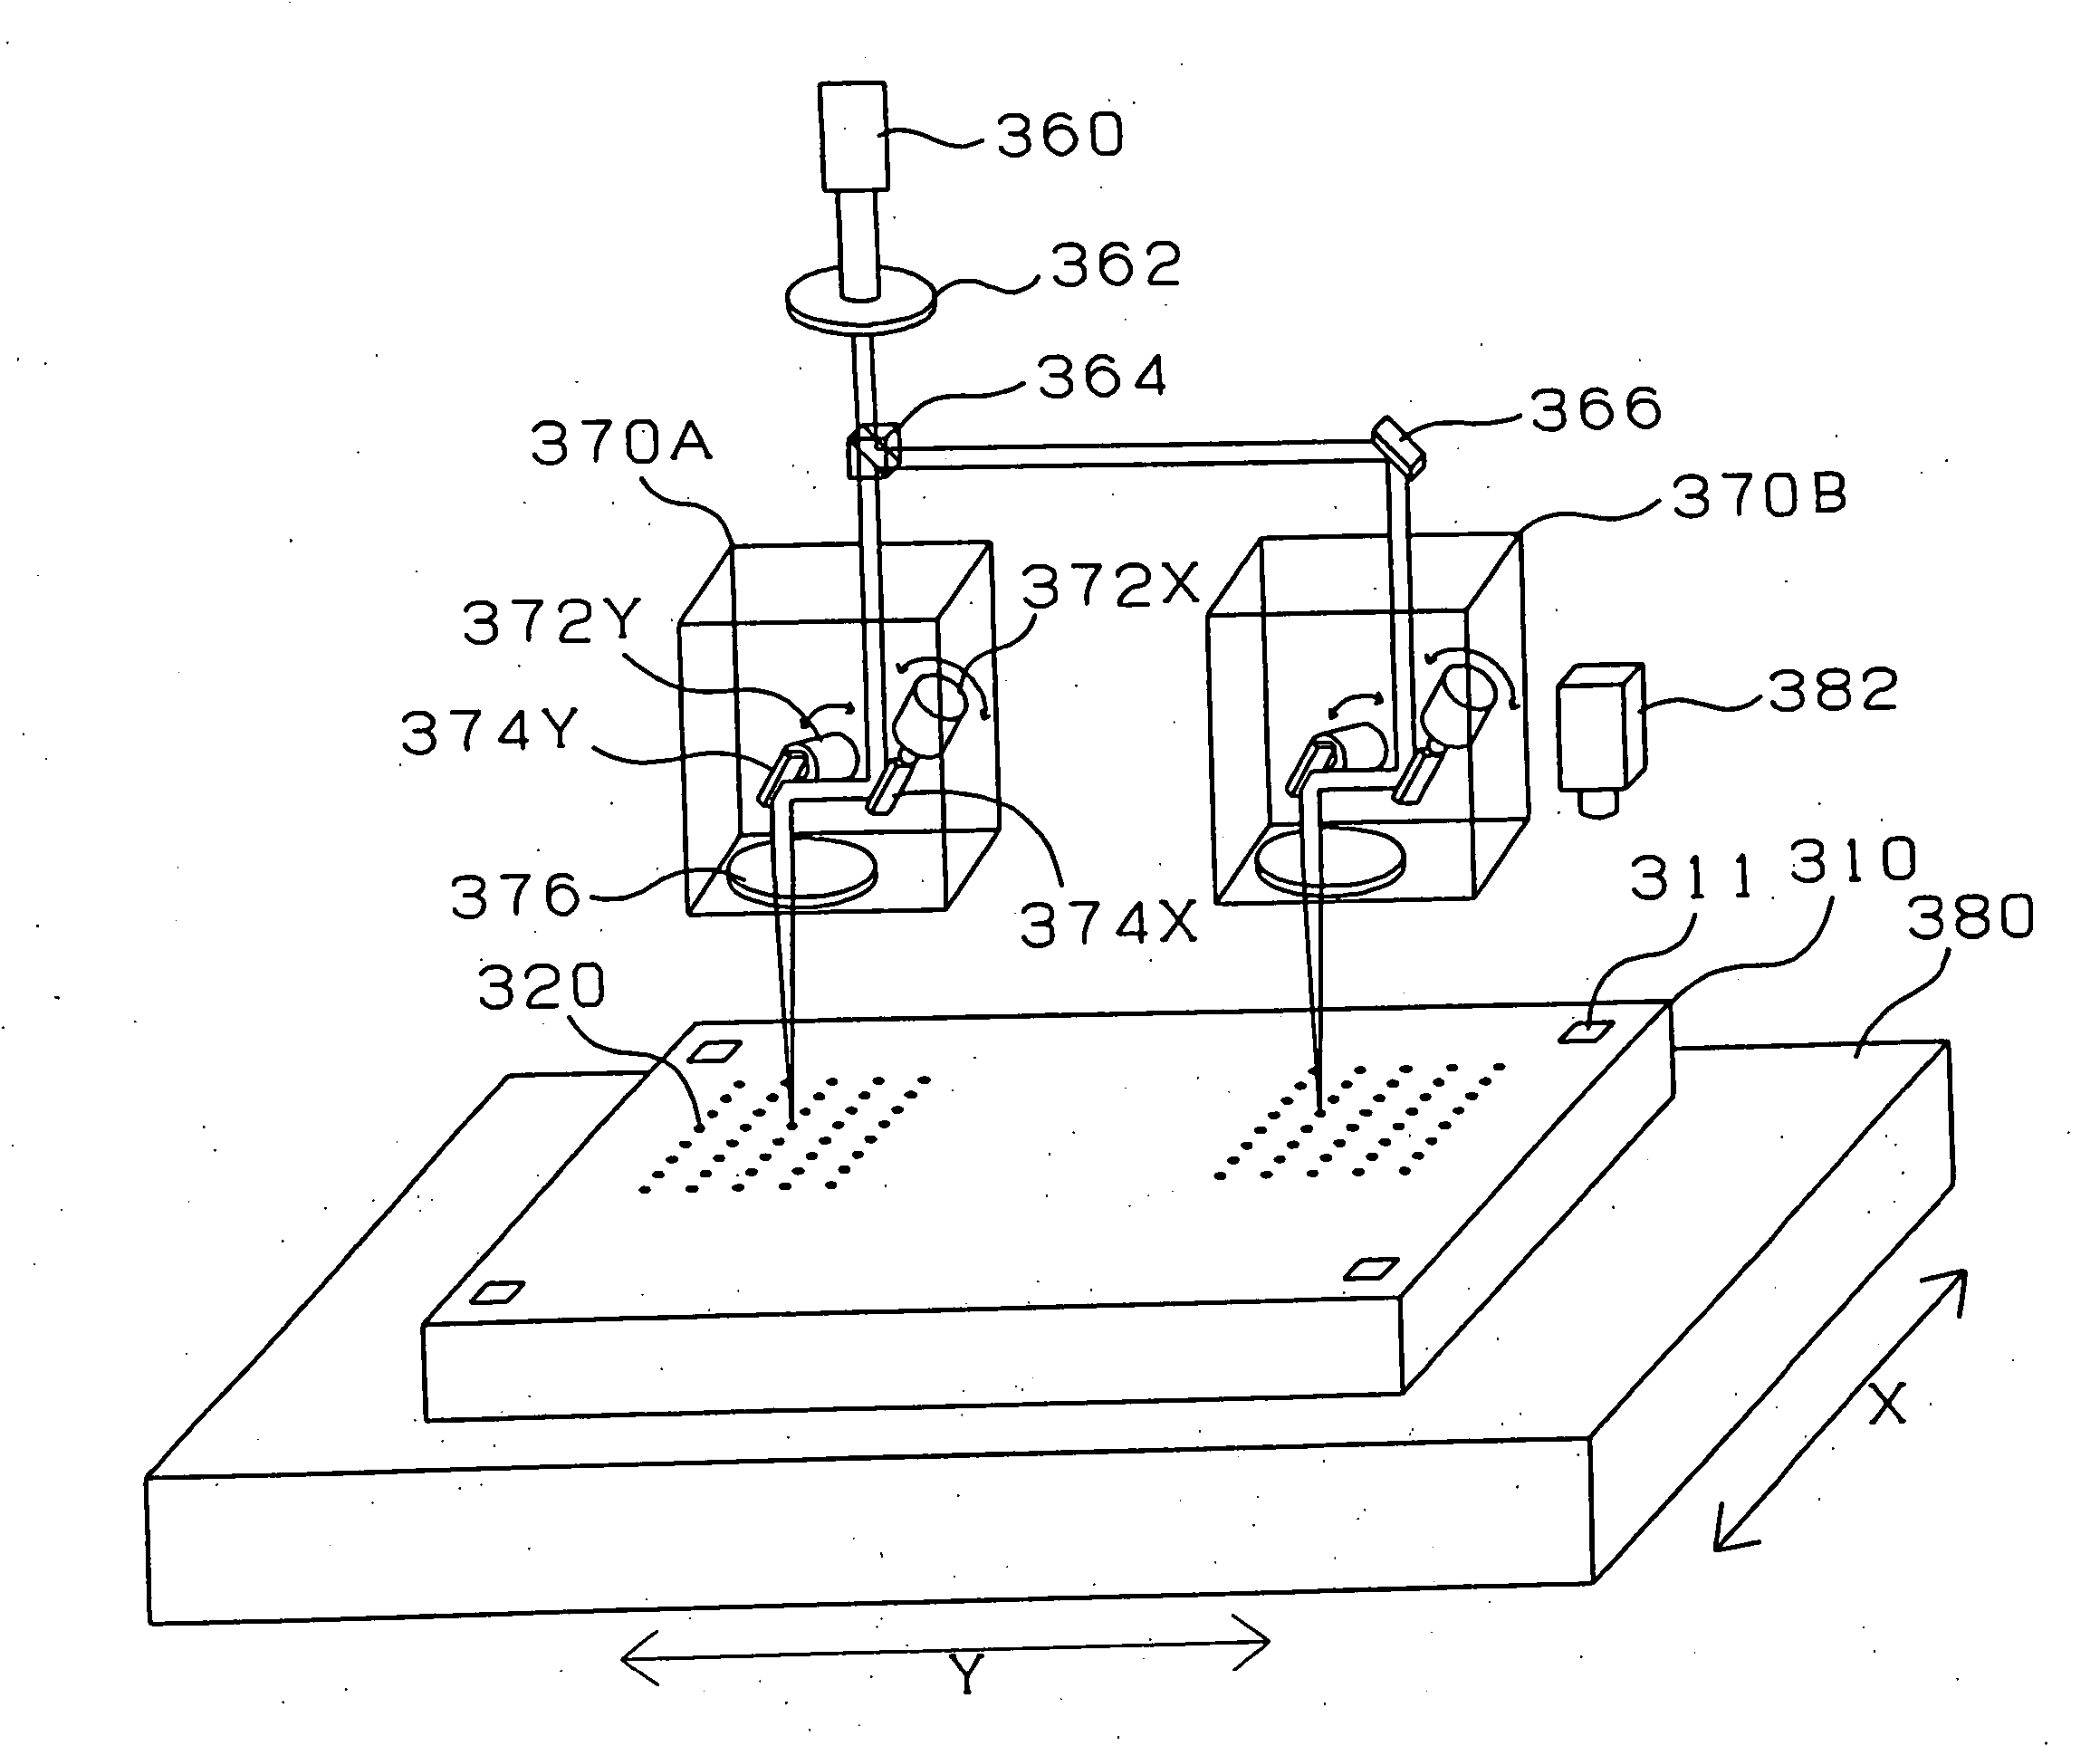 Laser machining apparatus, and apparatus and method for manufacturing a multilayered printed wiring board